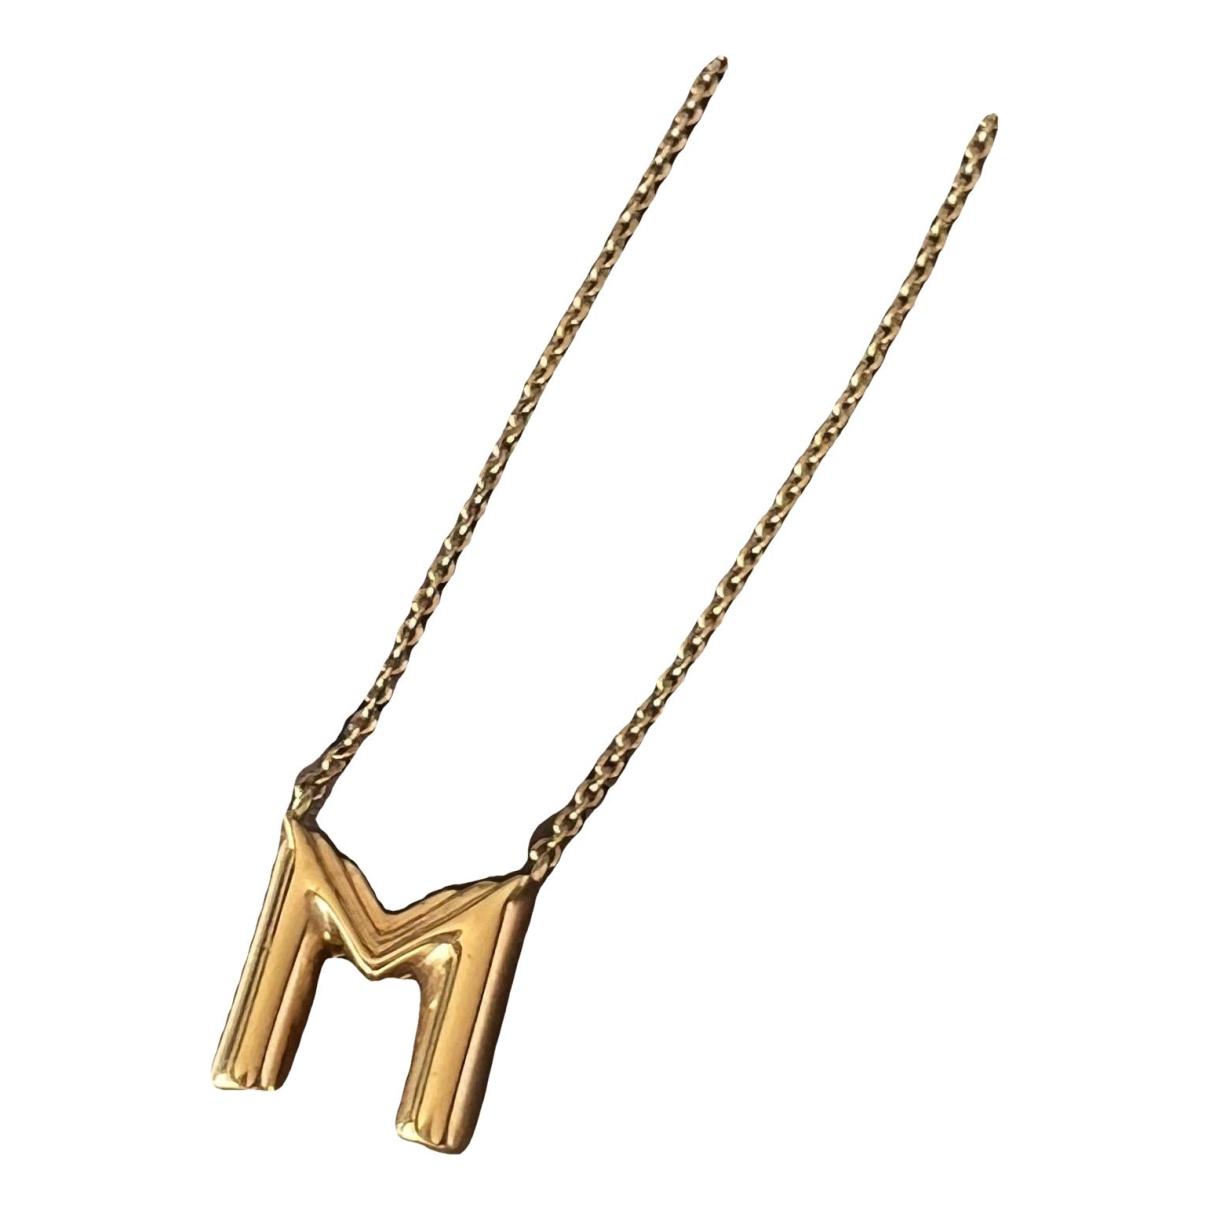 Louis Vuitton - Authenticated Nanogram Necklace - Gold Plated Gold for Women, Very Good Condition